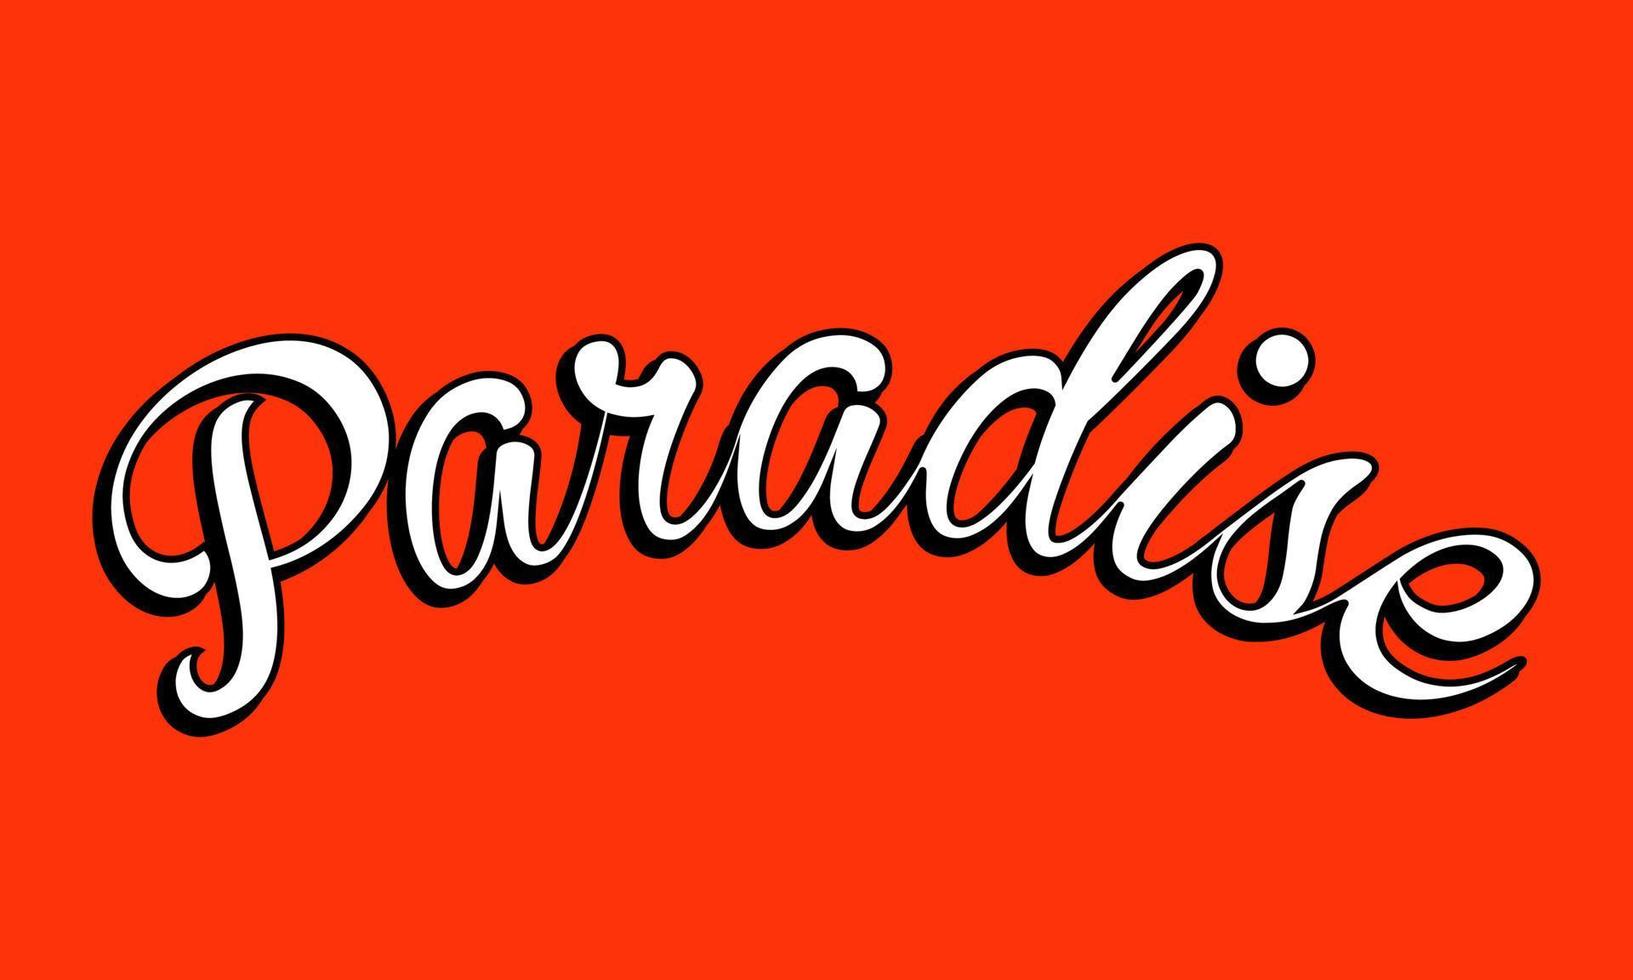 Paradise typography text effect lettering vector illustration design isolated on red background